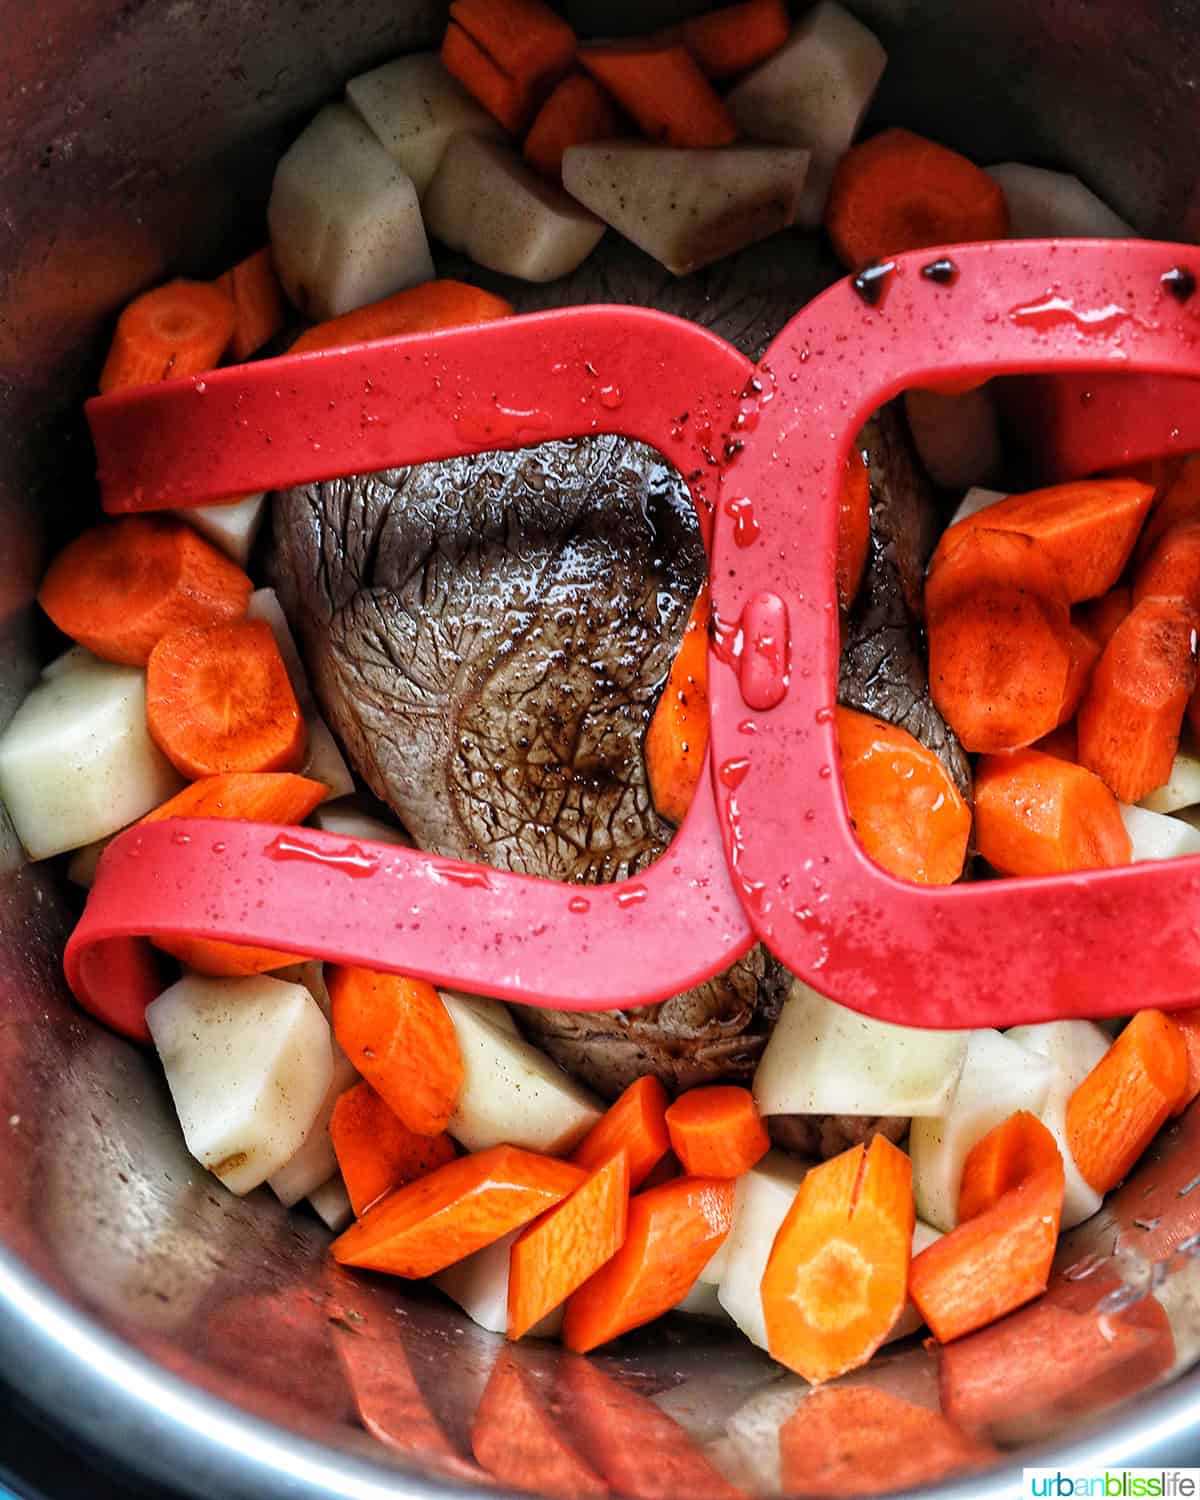 sirloin tip roast, carrots, and potatoes in a red sling in the Instant Pot.